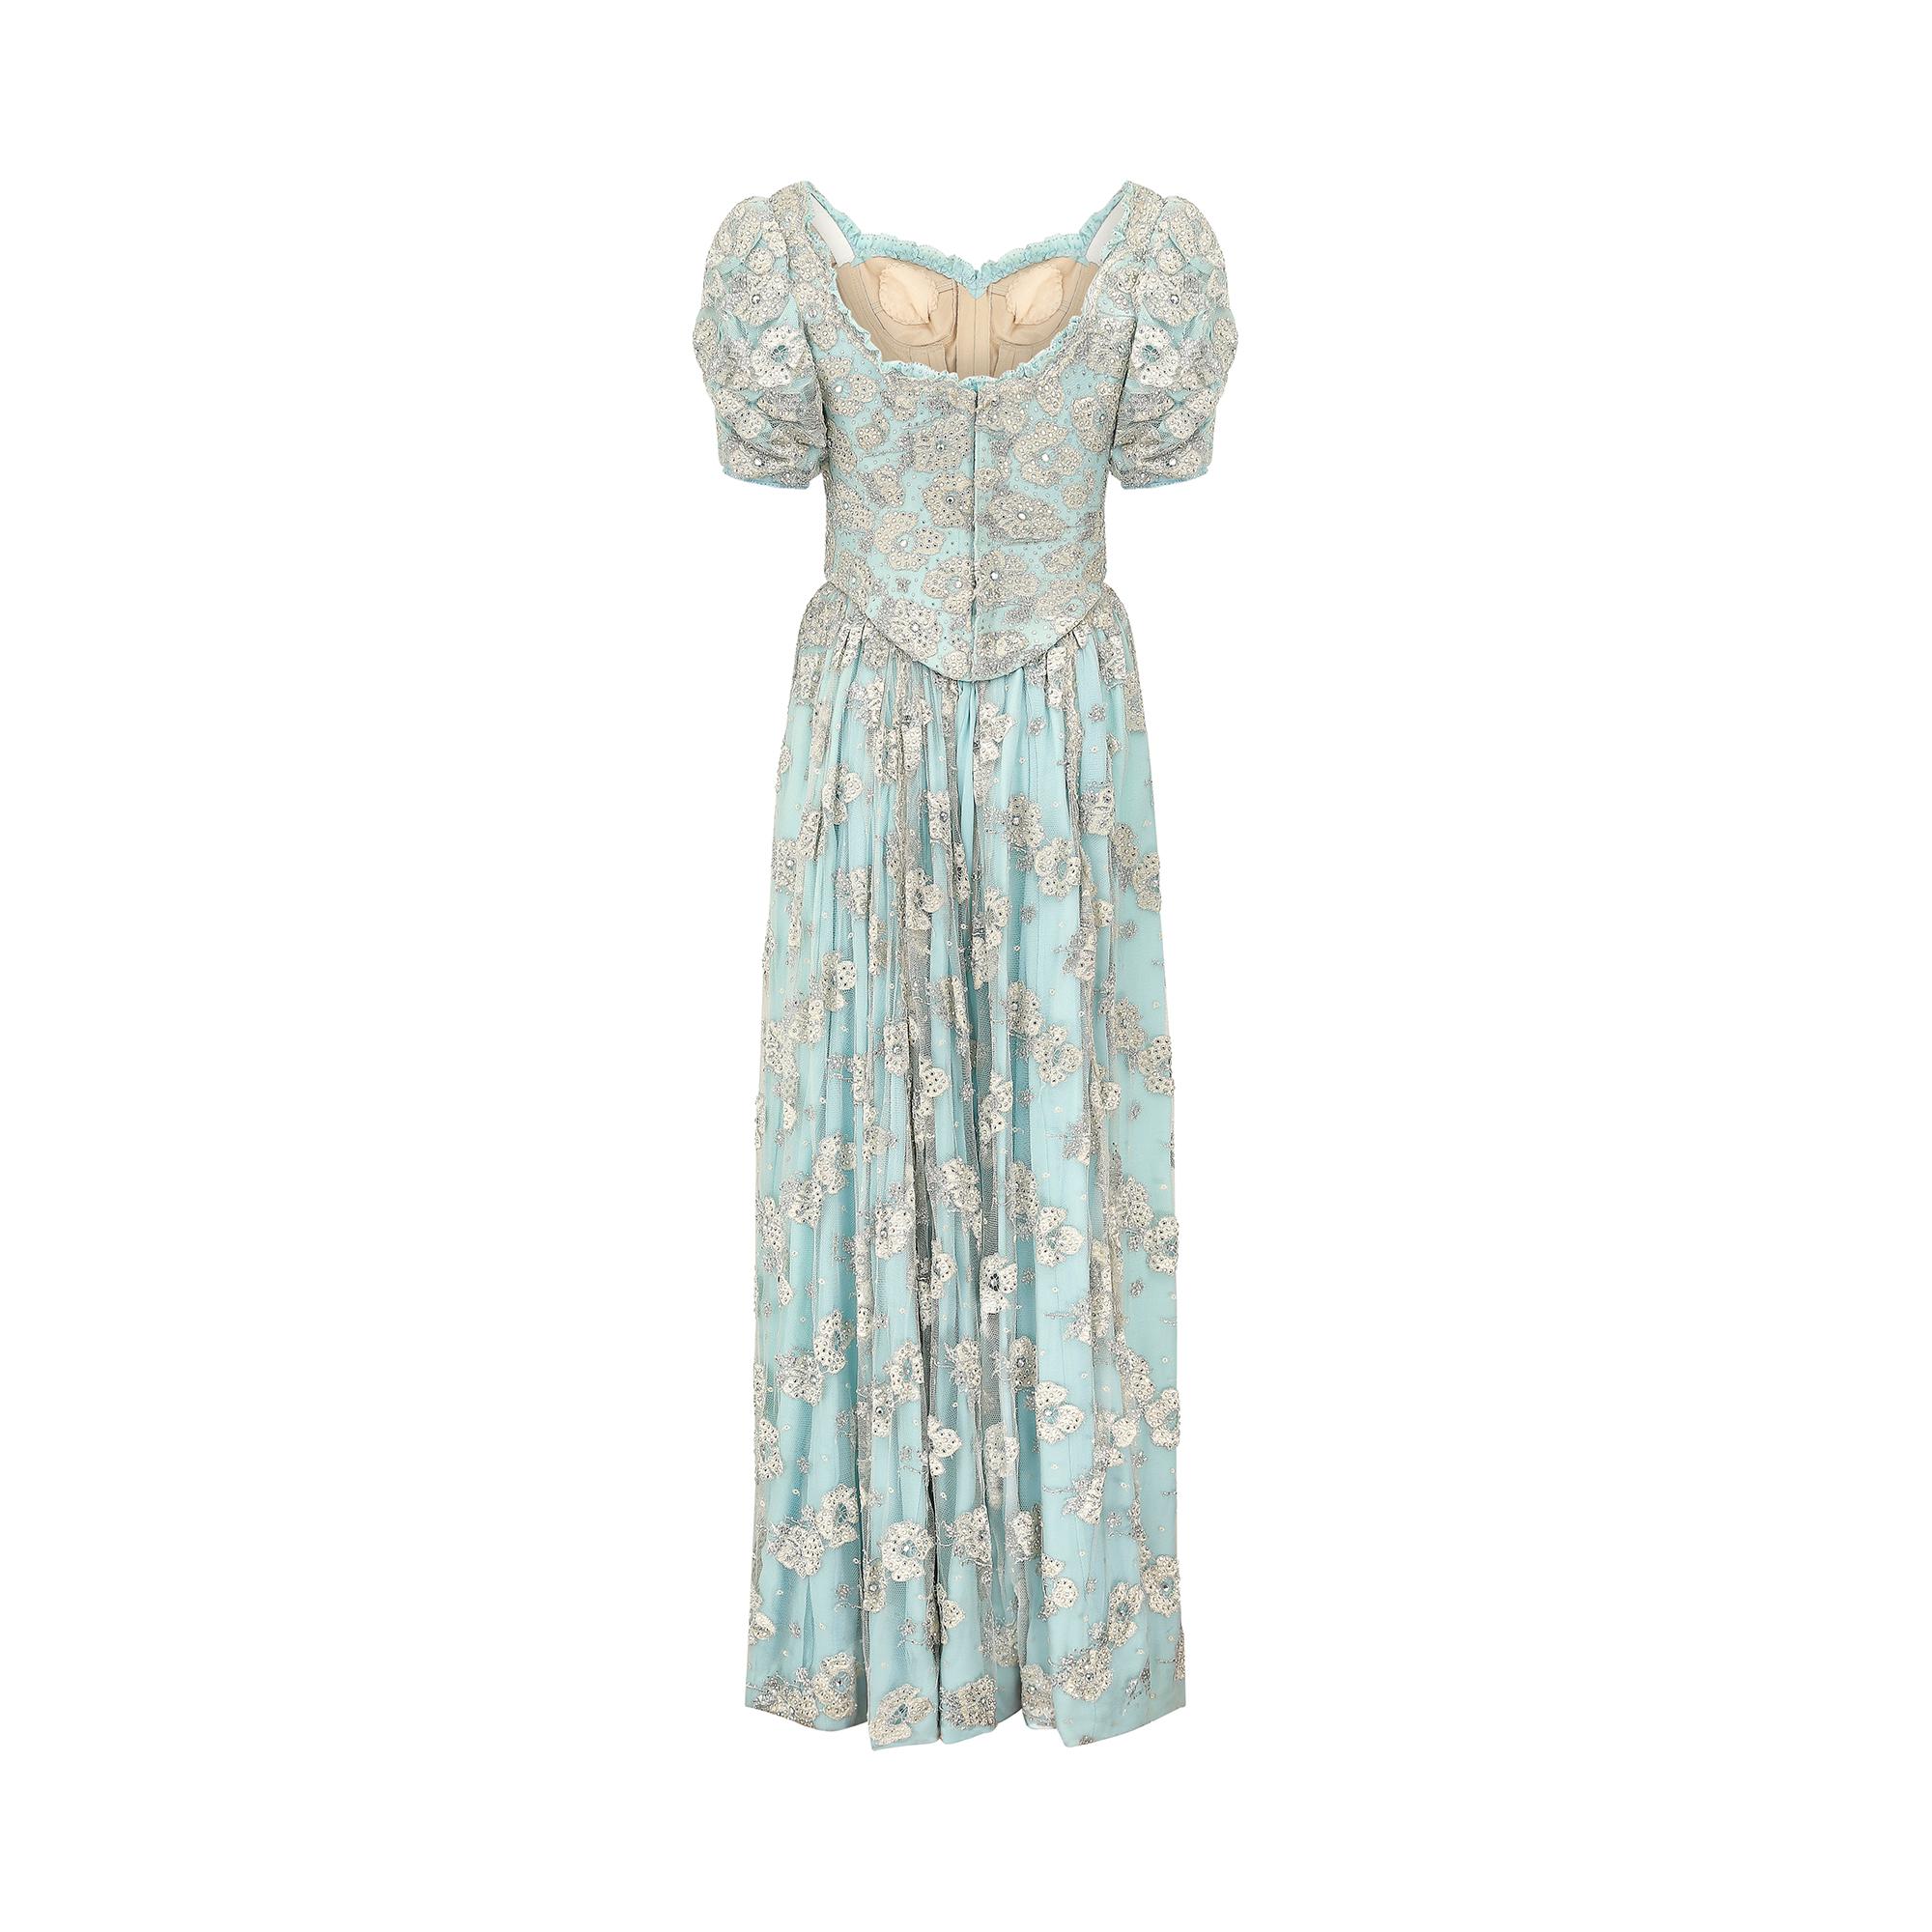 1990s Bespoke Embellished Lace and Crystal Turquoise Dress In Excellent Condition For Sale In London, GB